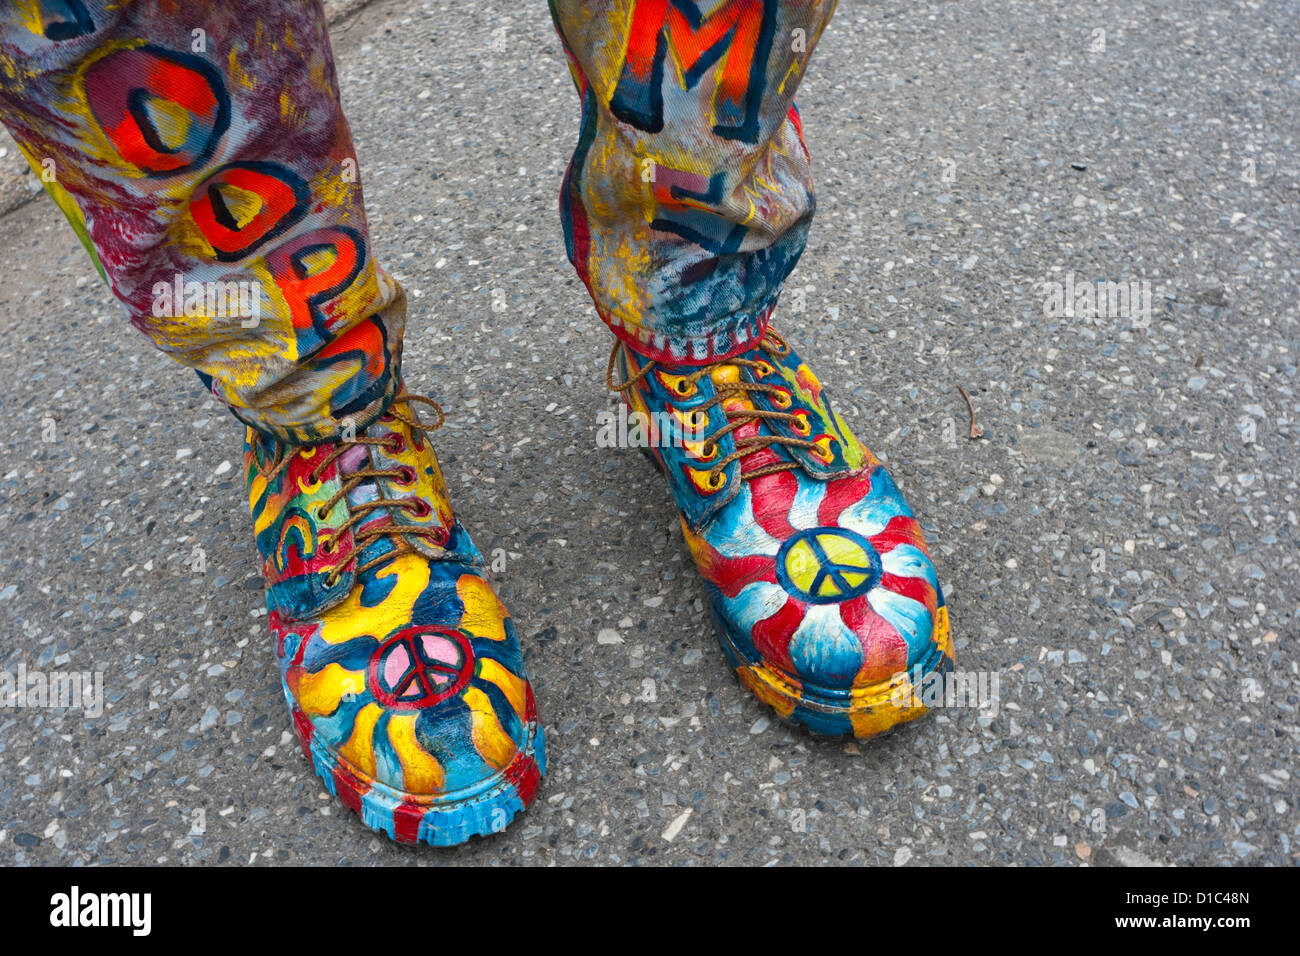 New York, NY 15 December 2012 Anti corporate bail out protester in his psychedelic boots ©Stacy Walsh Rosenstock/Alamy Stock Photo